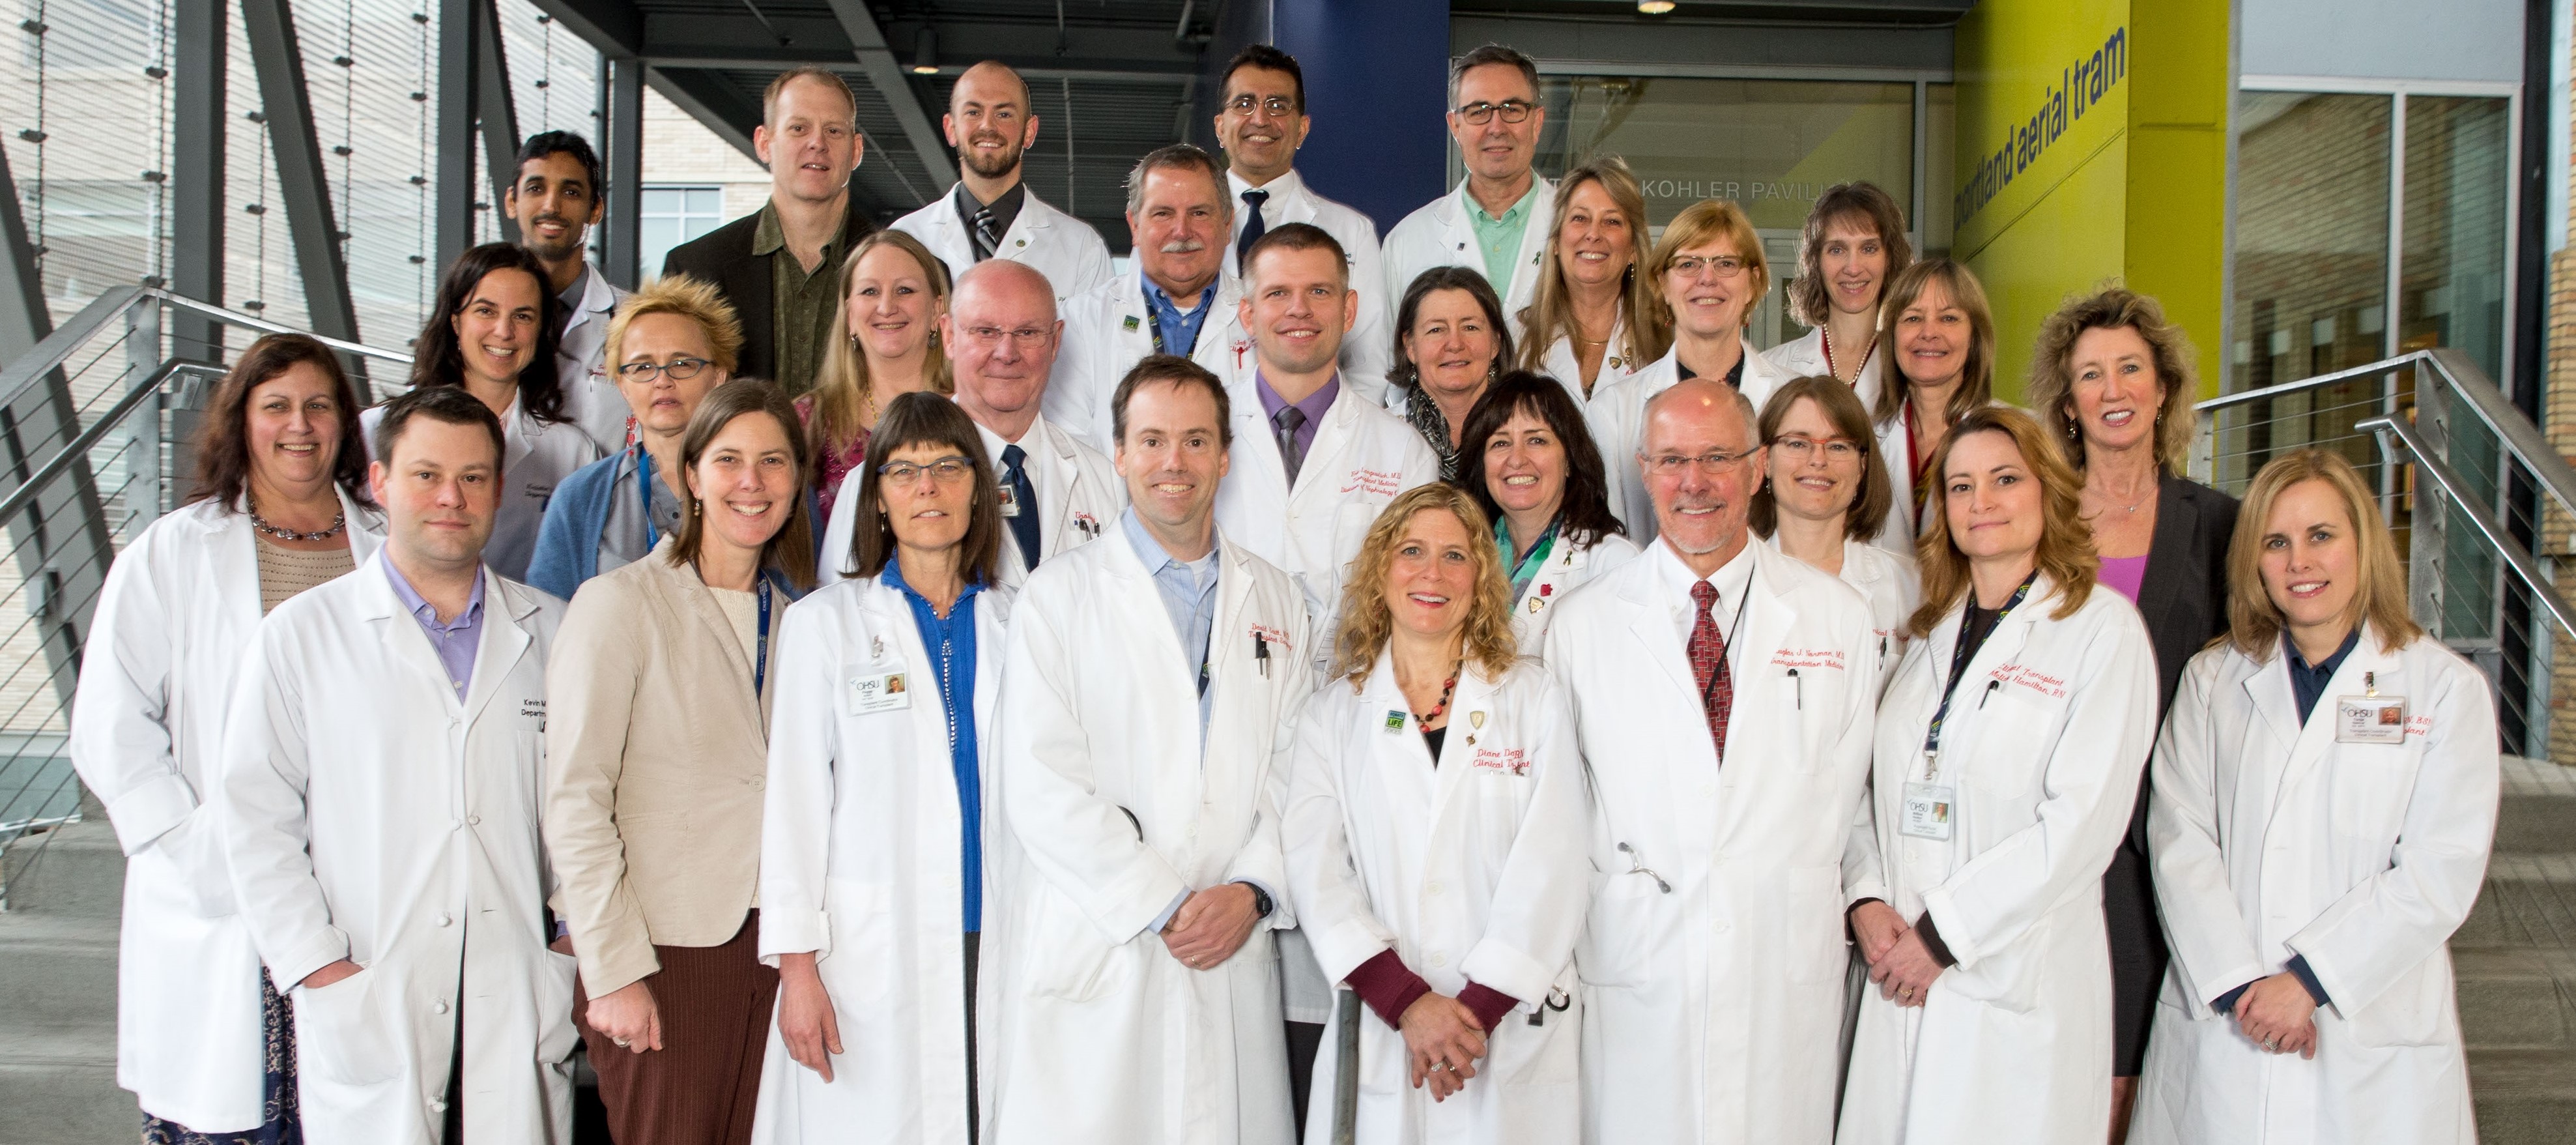 The Clinical Transplant Services Team standing together a the OHSU enterence